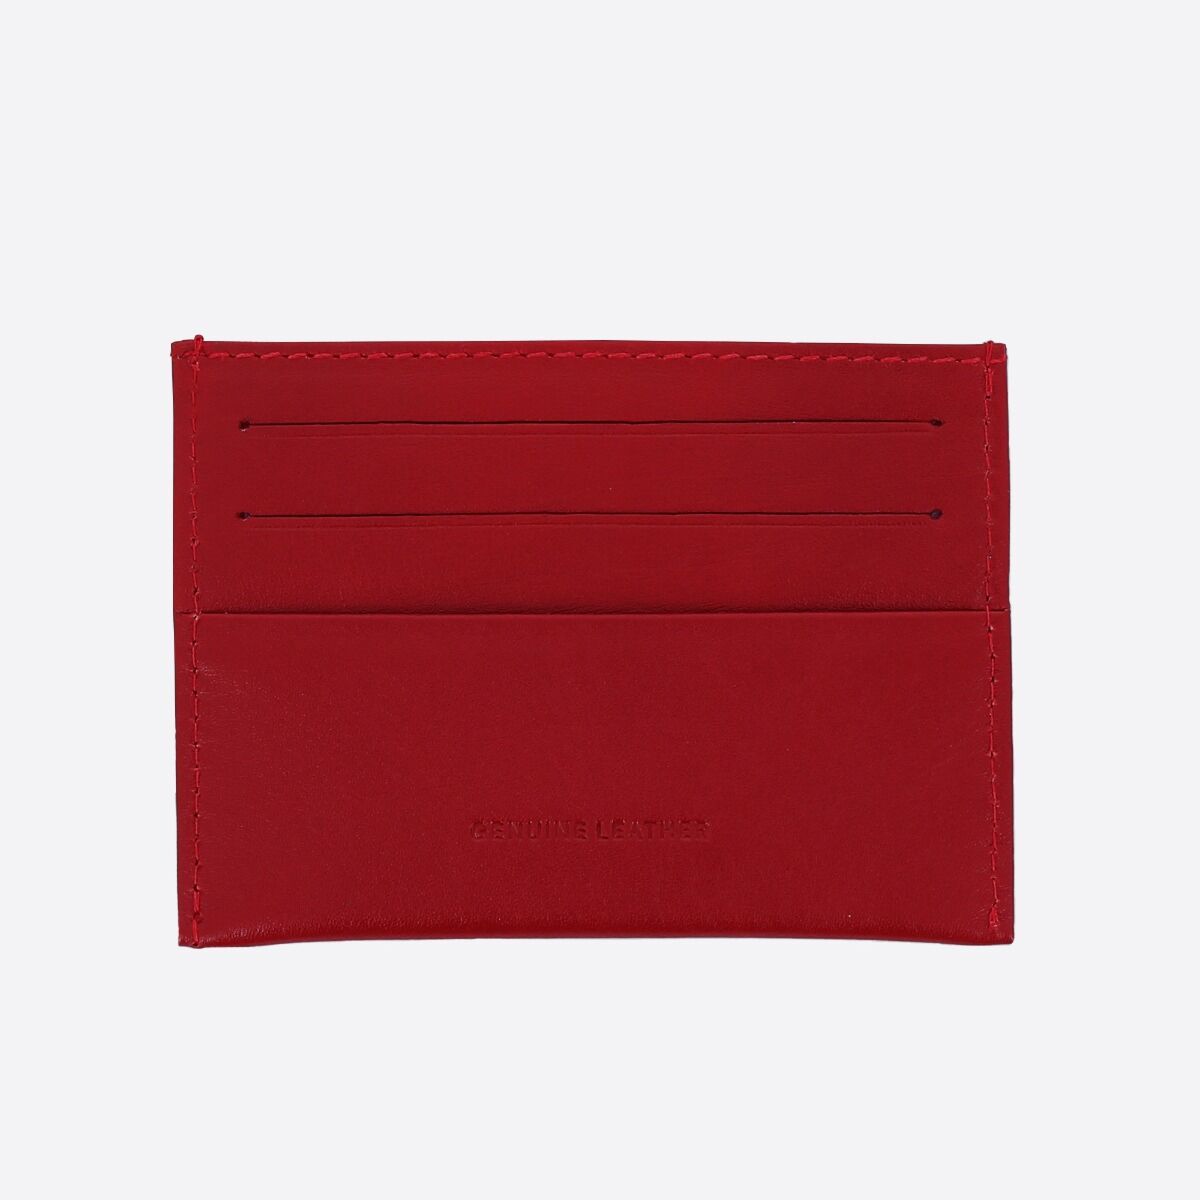 NUVOLA PELLE Minimalist leather credit card wallet - Red